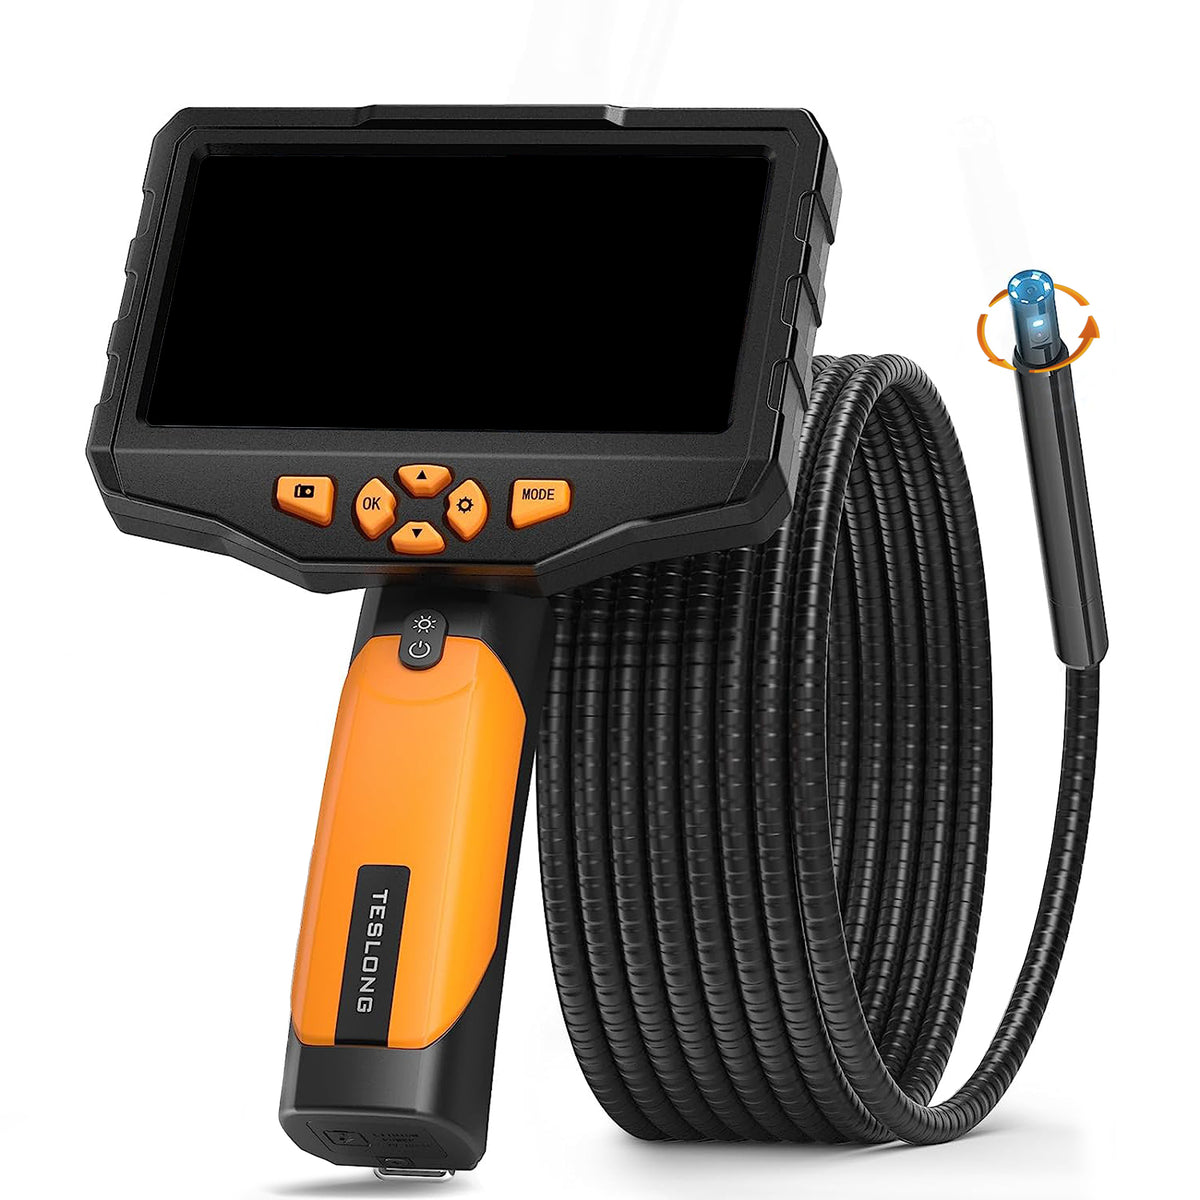 Wireless Waterproof IP67 Endoscope Inspection Camera For iPhone 8 Plus X  IOS US